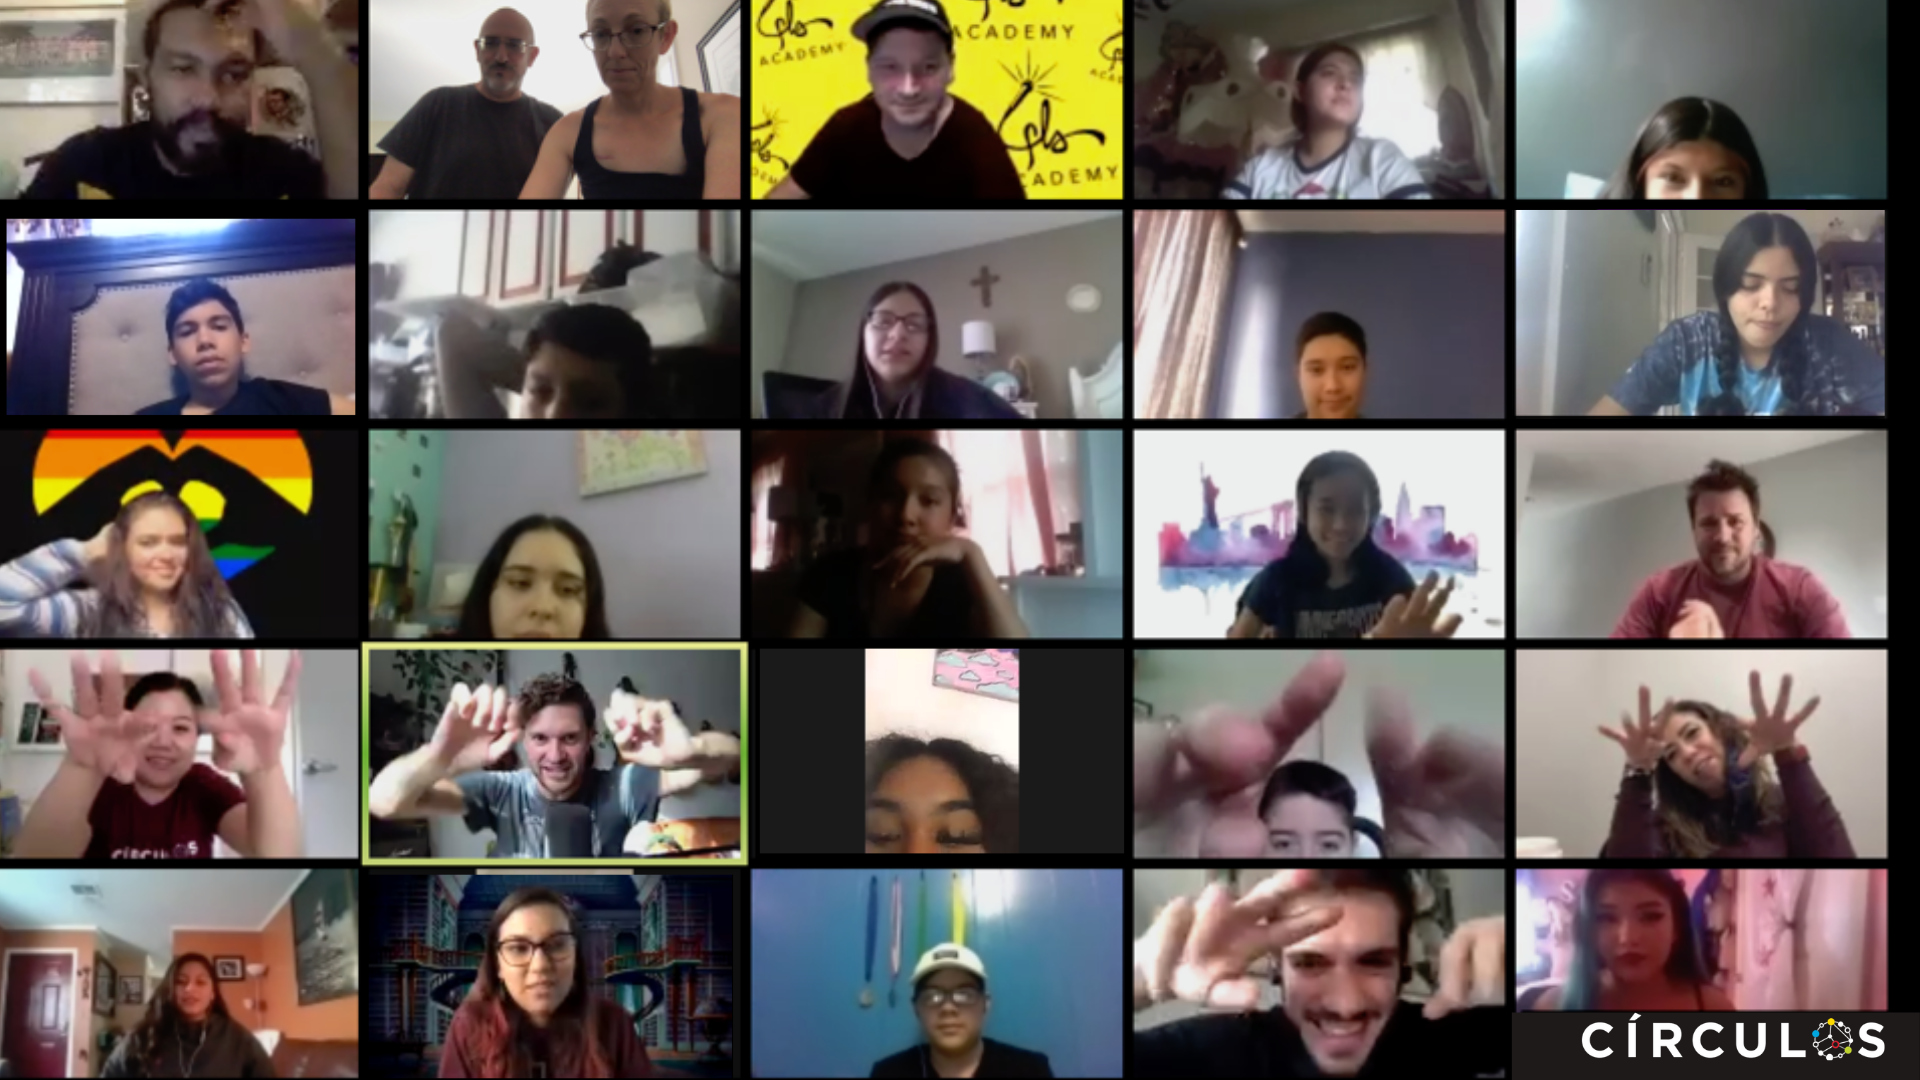 Participants in video chat